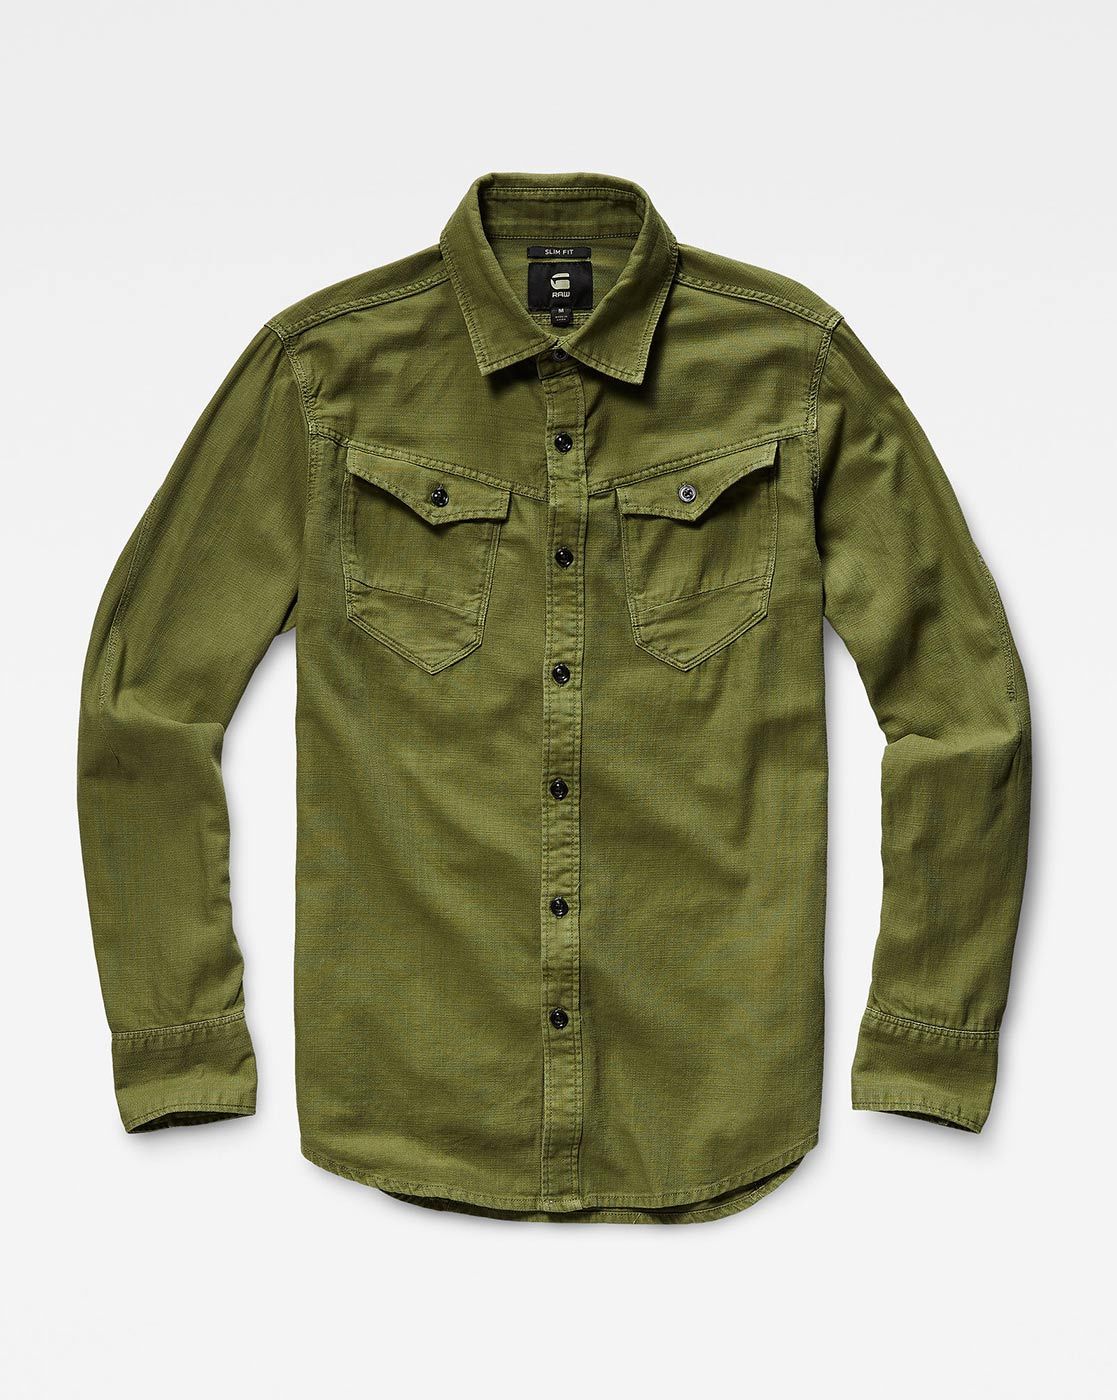 25 New Collection of Green Shirts For Men and Women